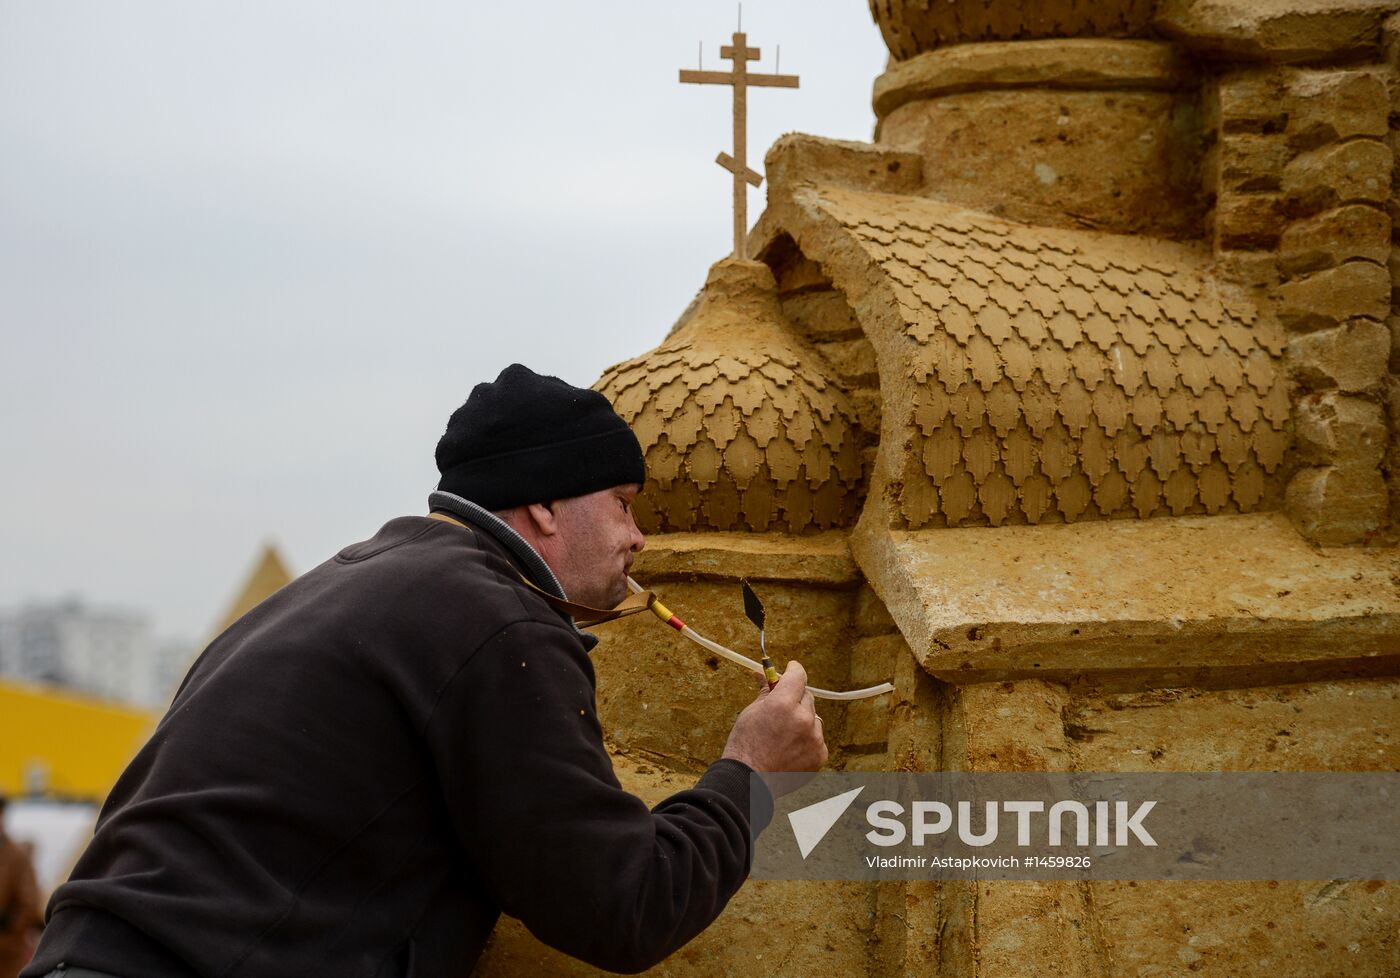 Exhibition of sand sculptures opens in Moscow